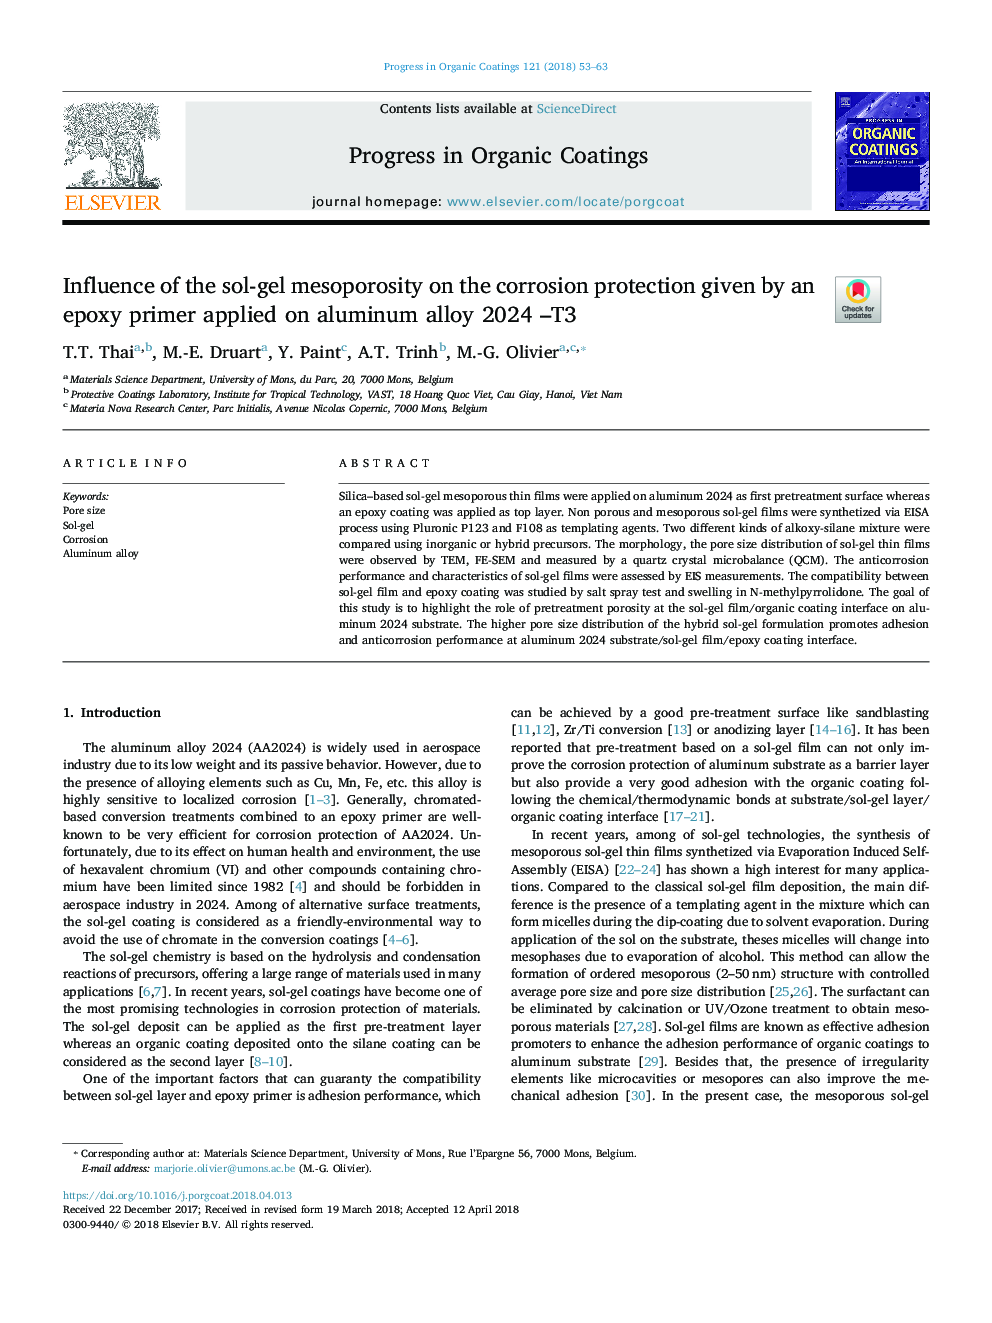 Influence of the sol-gel mesoporosity on the corrosion protection given by an epoxy primer applied on aluminum alloy 2024 -T3